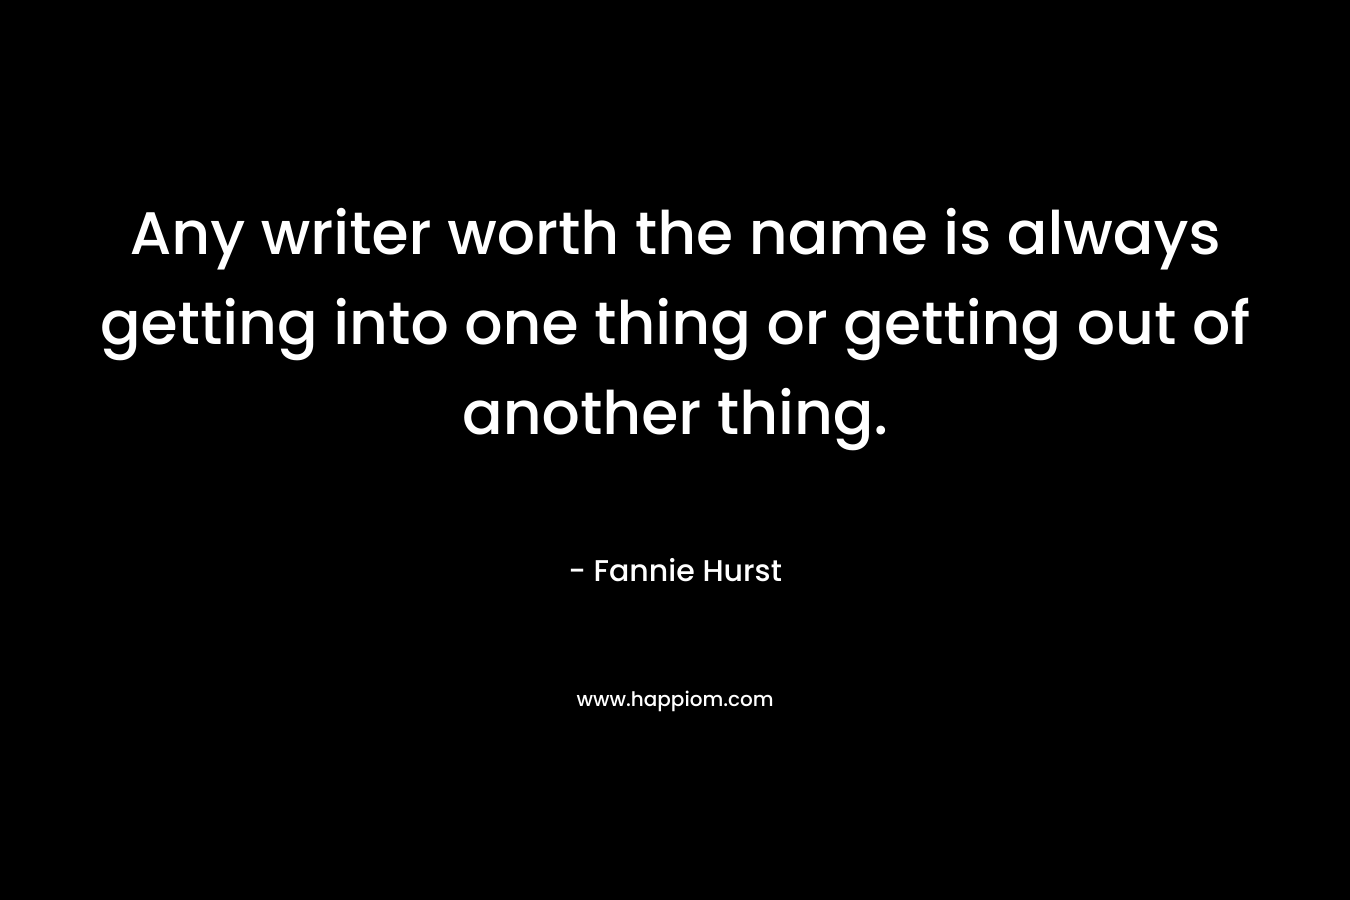 Any writer worth the name is always getting into one thing or getting out of another thing.